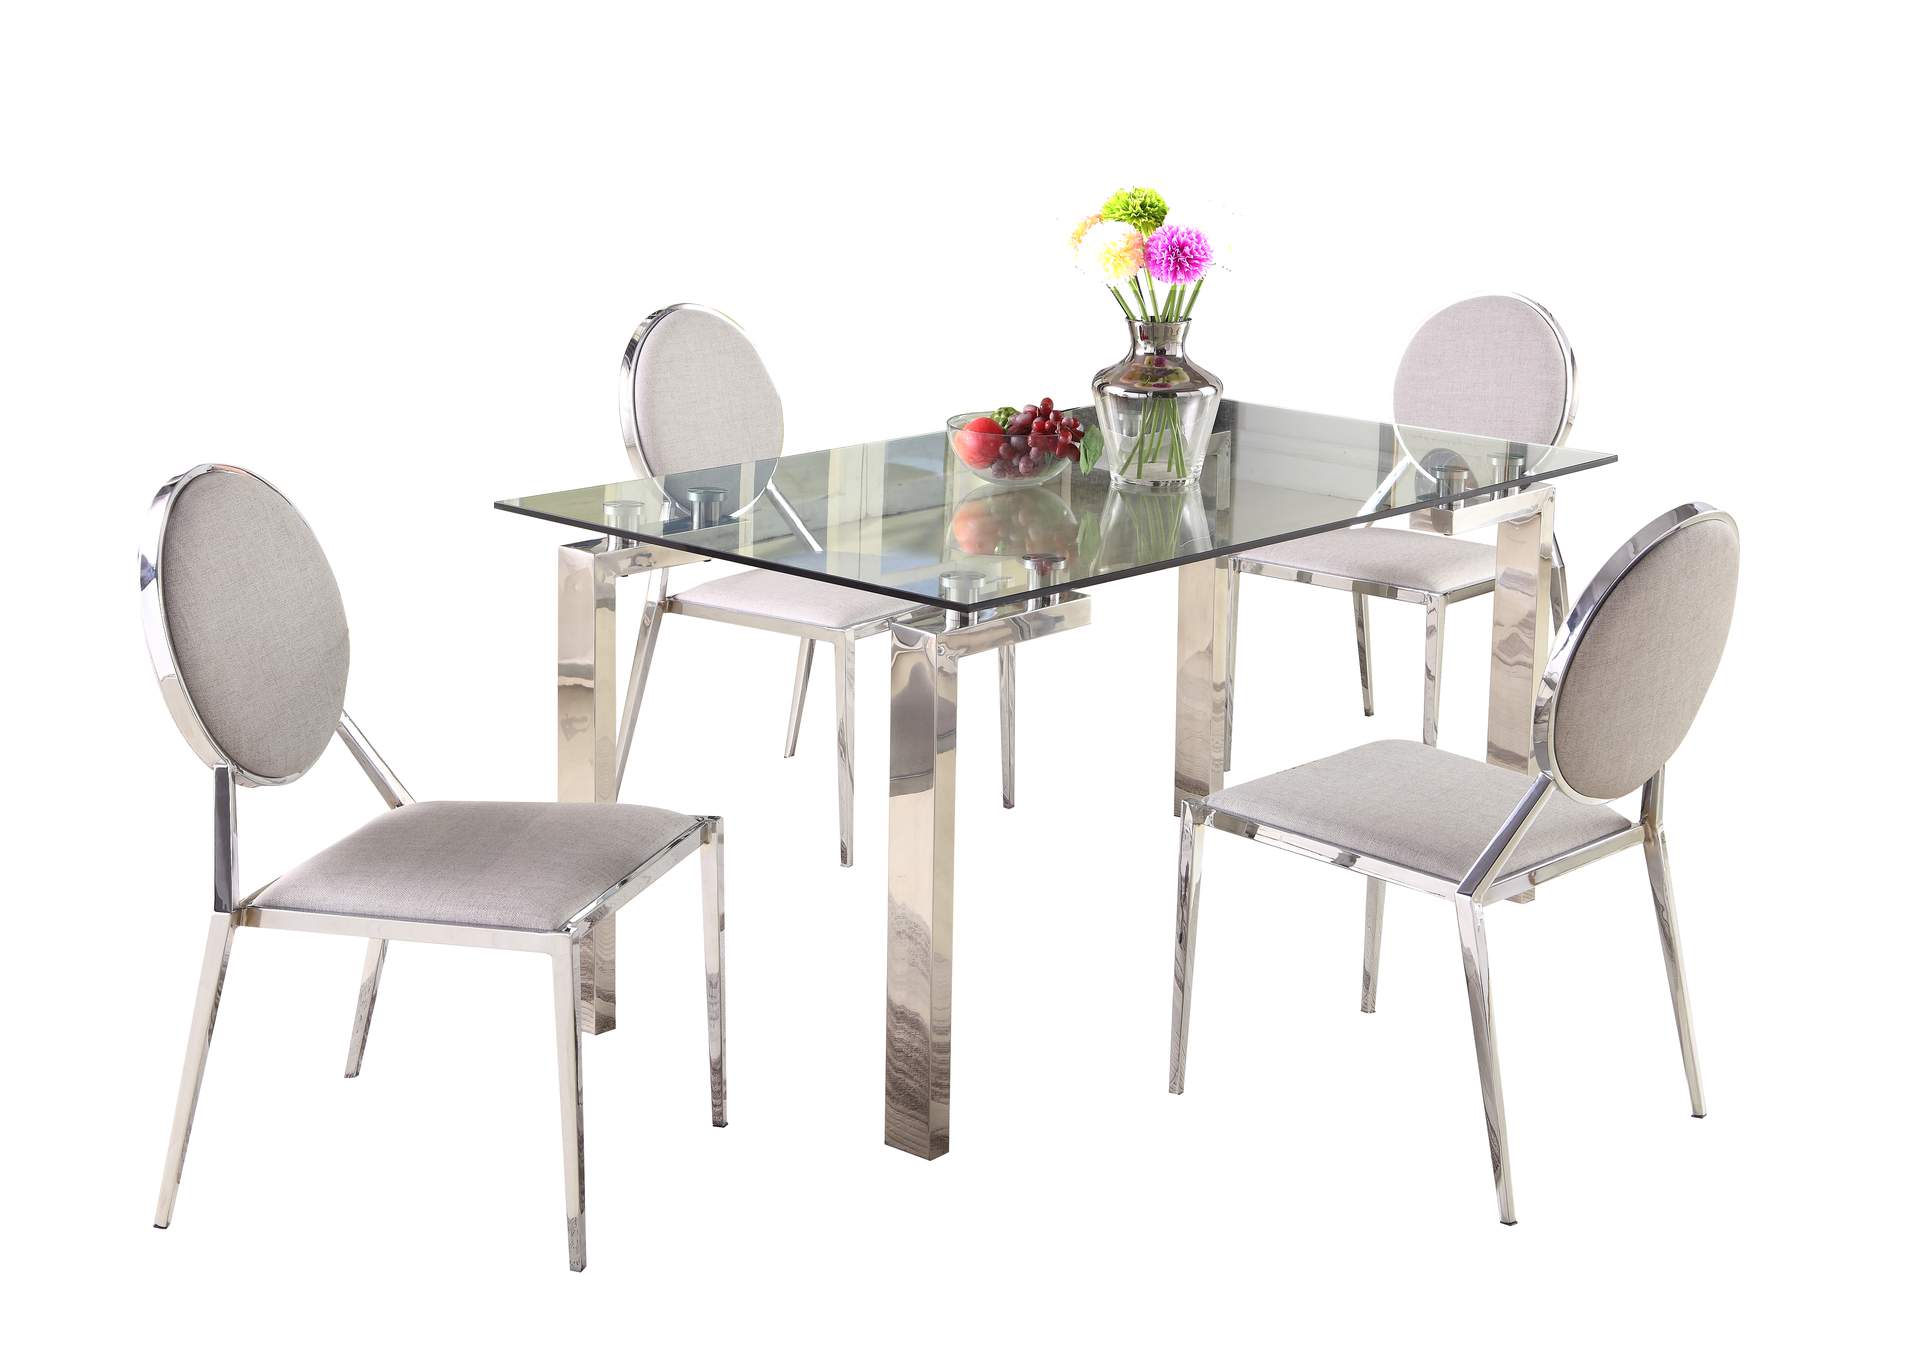 Contemporary Dining Set w/ Glass Table & Upholstered Chairs,Chintaly Imports